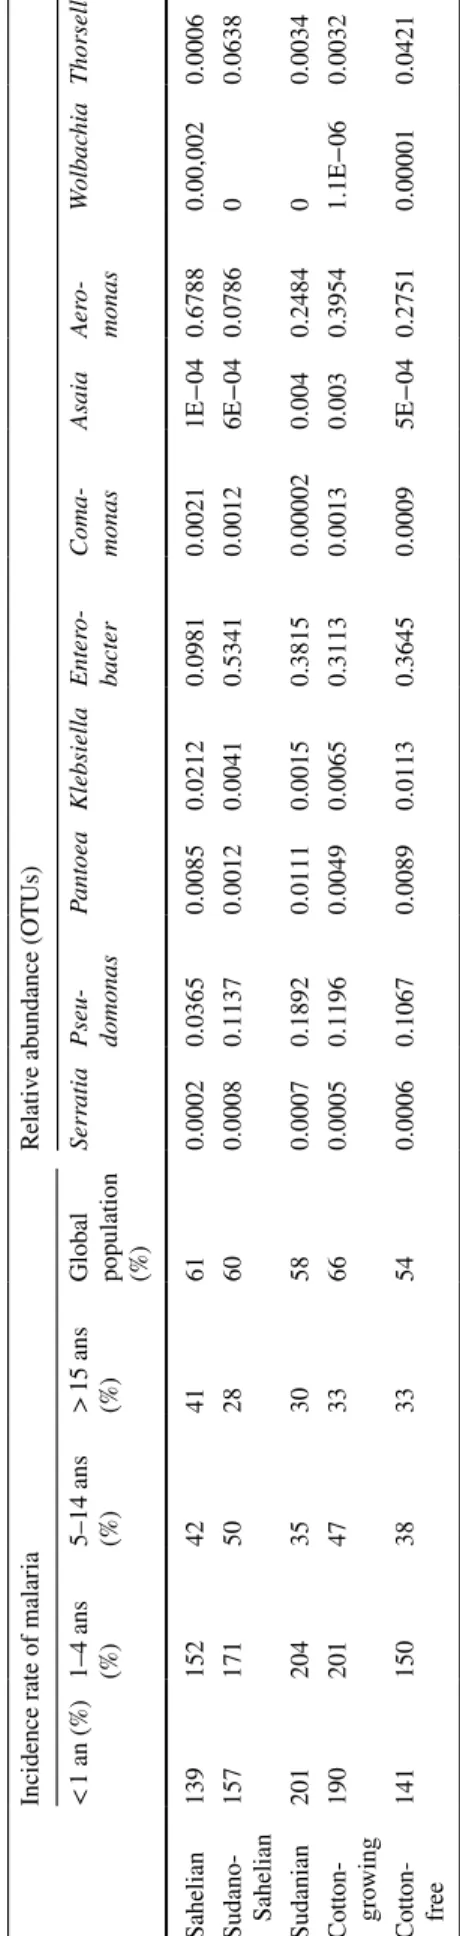 Table 2  Incidence of malaria (2017) in the three climatic areas in Burkina Faso, and the bacterial OTU abundances at the genus level which could interact with Plasmodium spp &lt; means less than; &gt; means more than